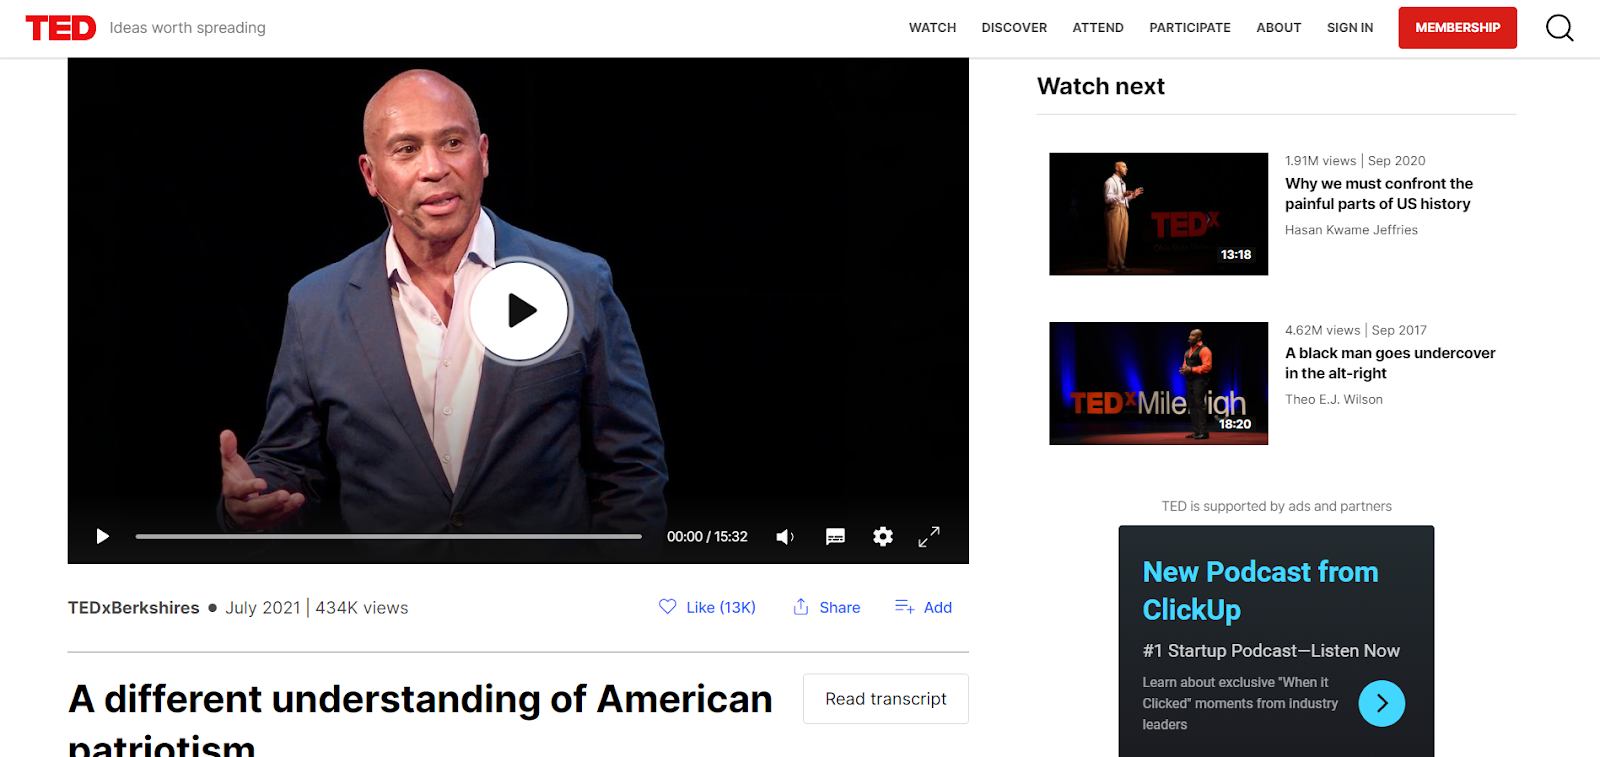 A different understanding of American patriotism on TED.com